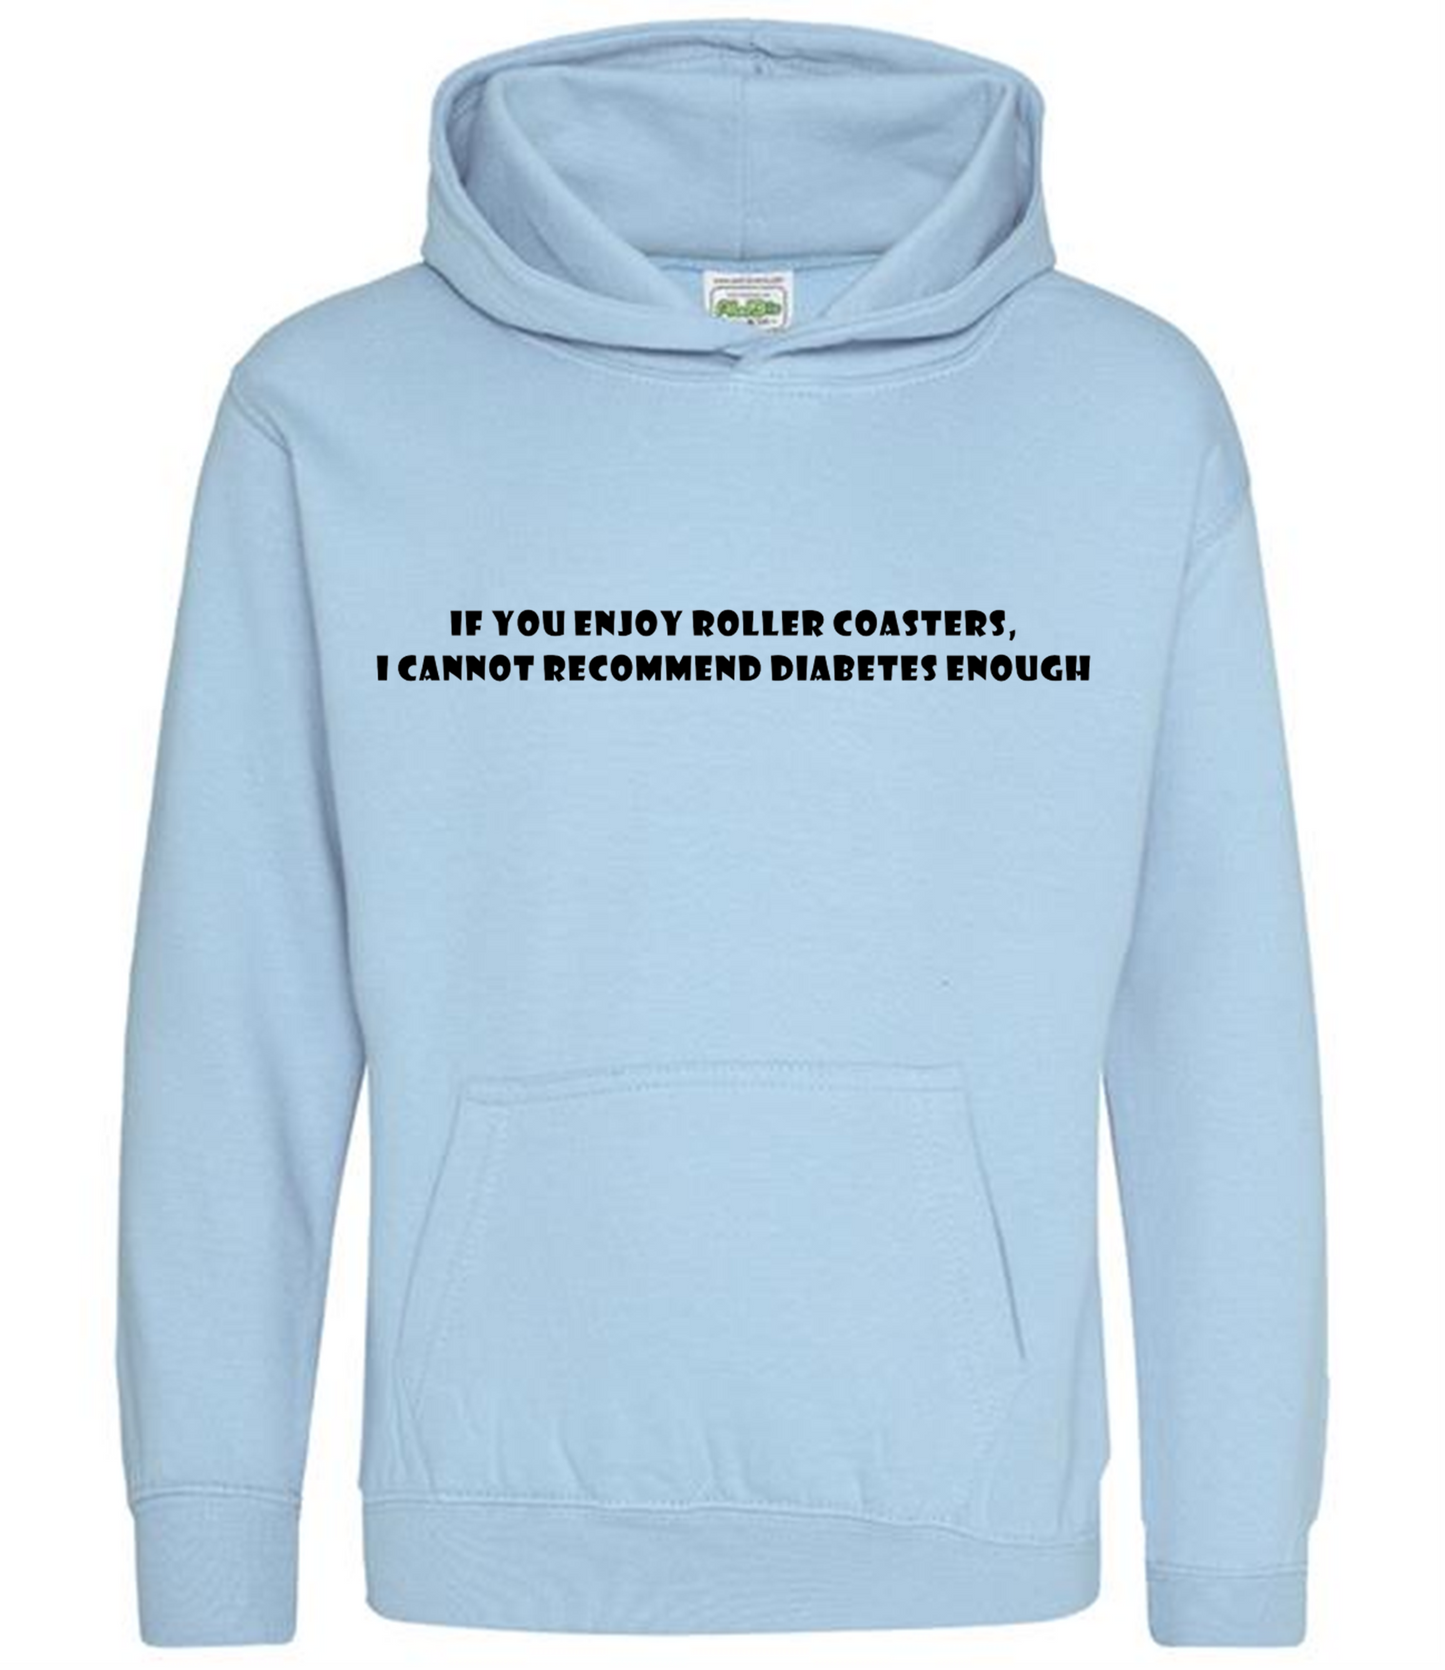 If You Enjoy Roller Coasters, I Cannot Recommend Diabetes Enough Kids Hoodie